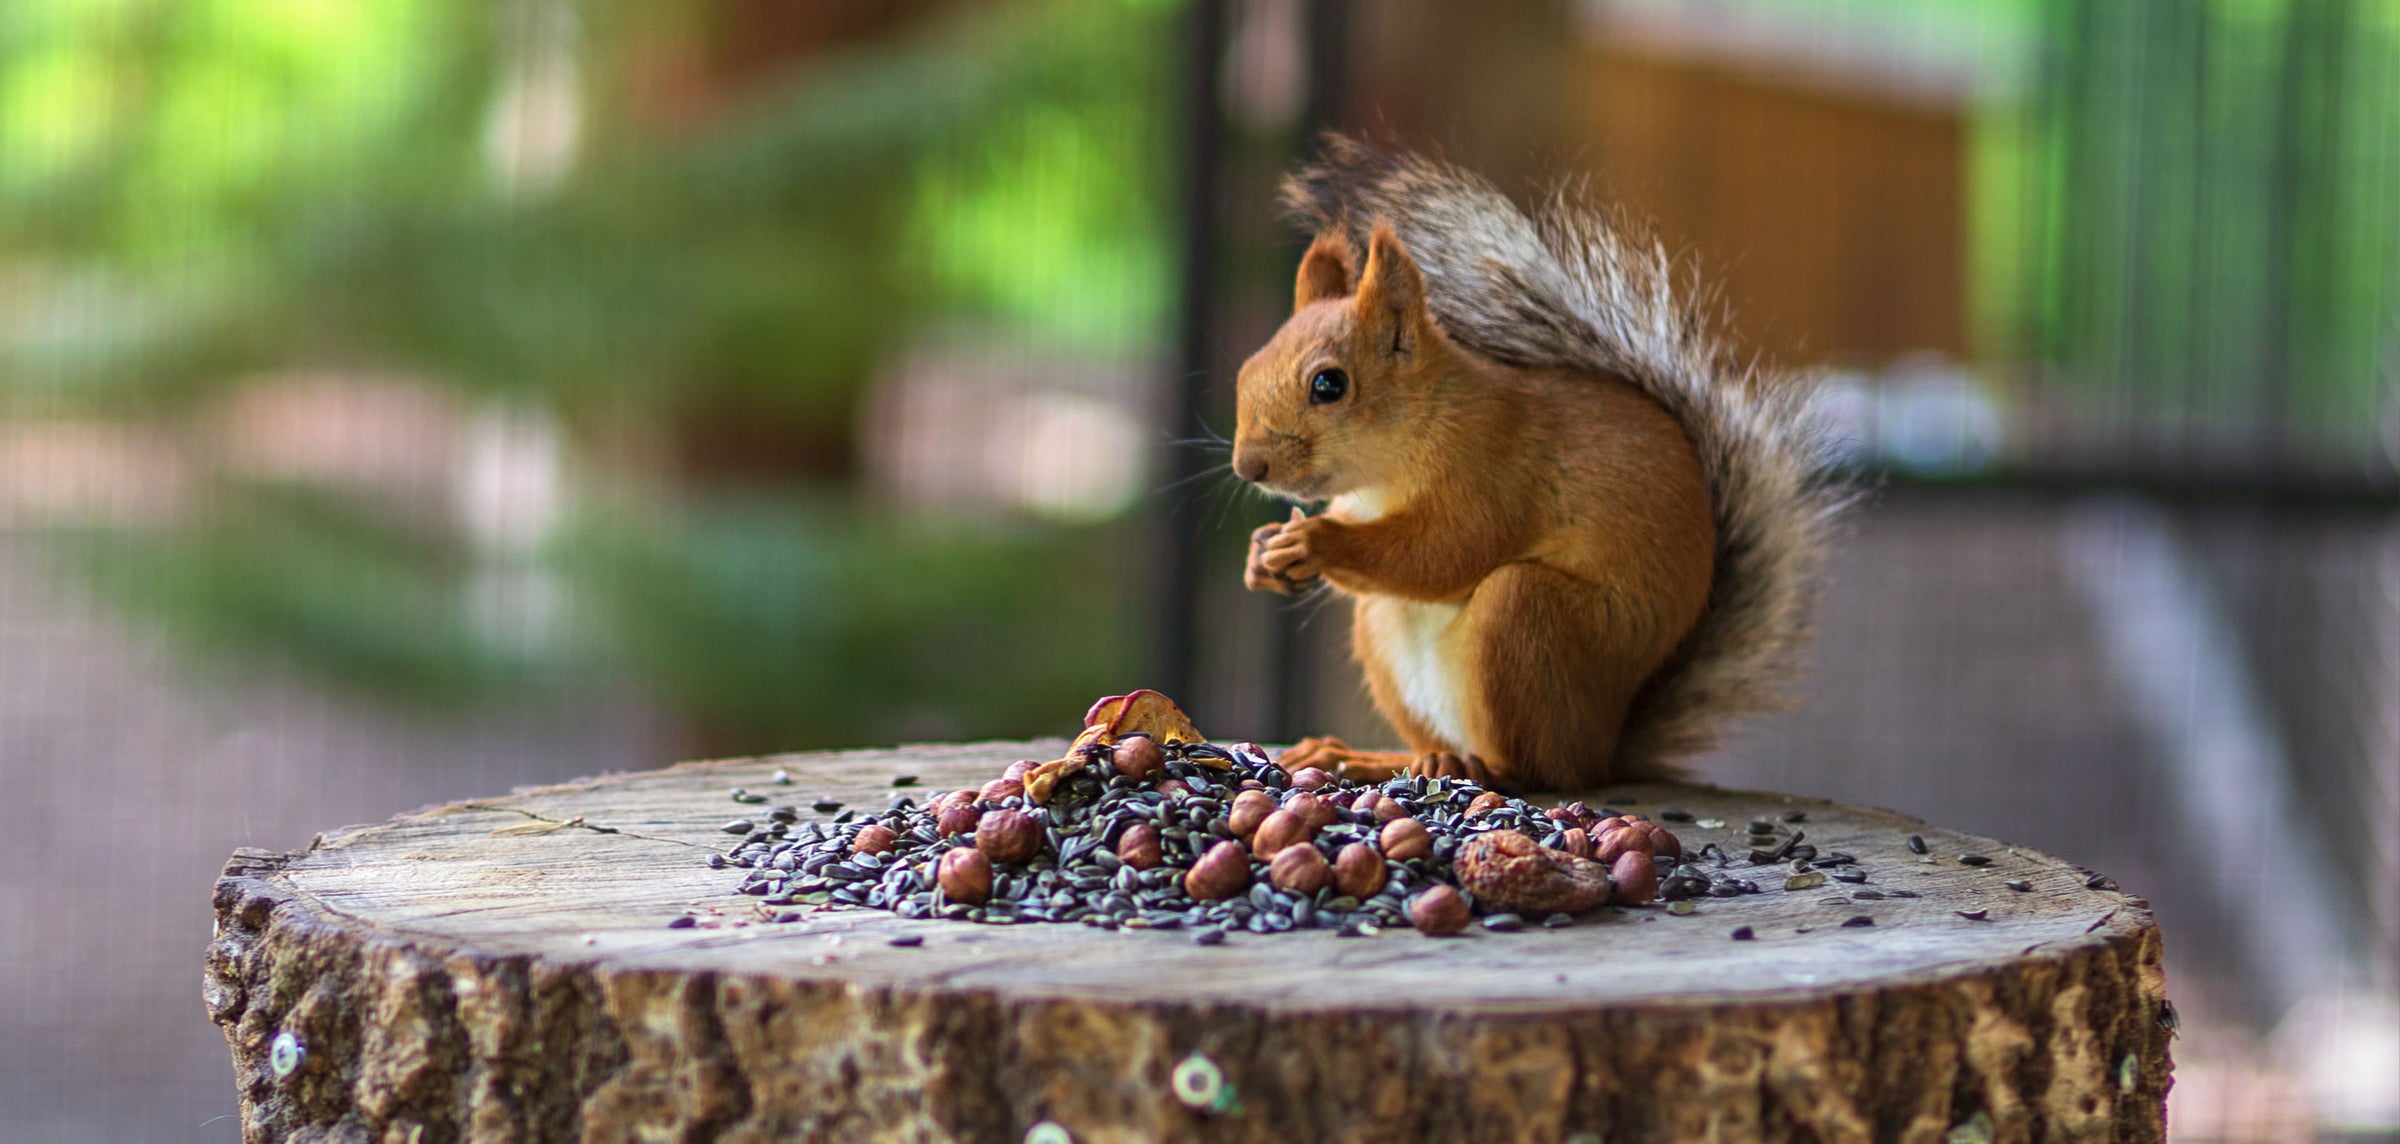 Red squirrel food